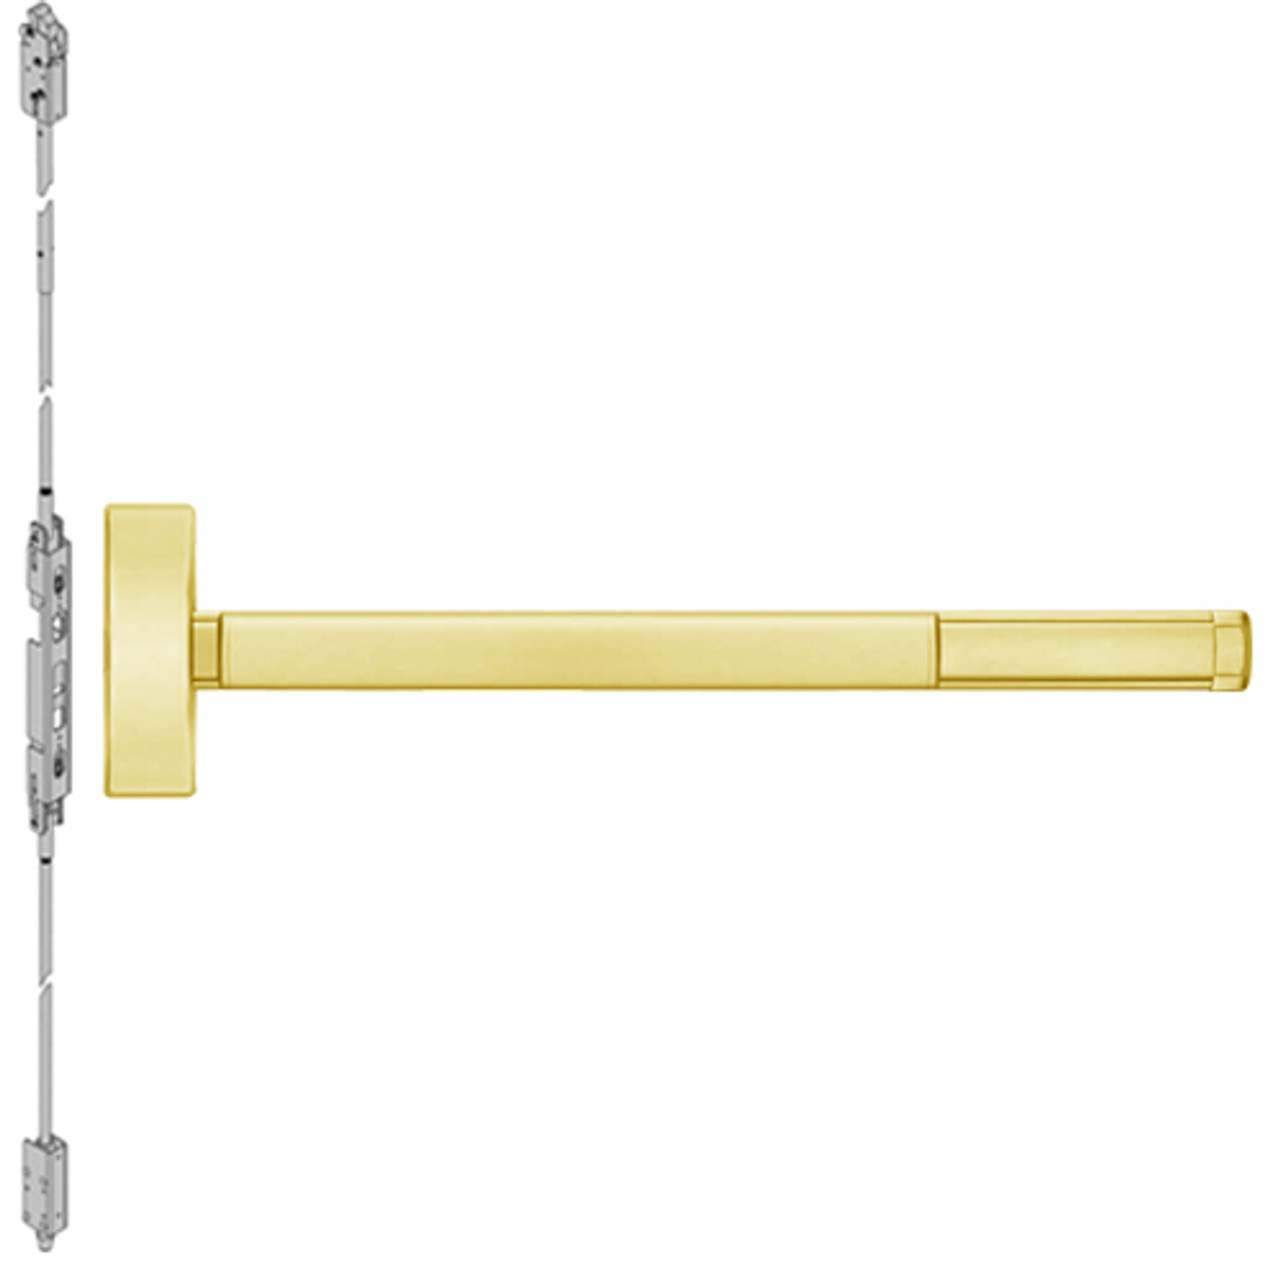 DEFL2808LBR-605-48 PHI 2800 Series Fire Rated Concealed Vertical Rod Exit Device with Delayed Egress Prepped for Key Controls Lever-Knob in Bright Brass Finish